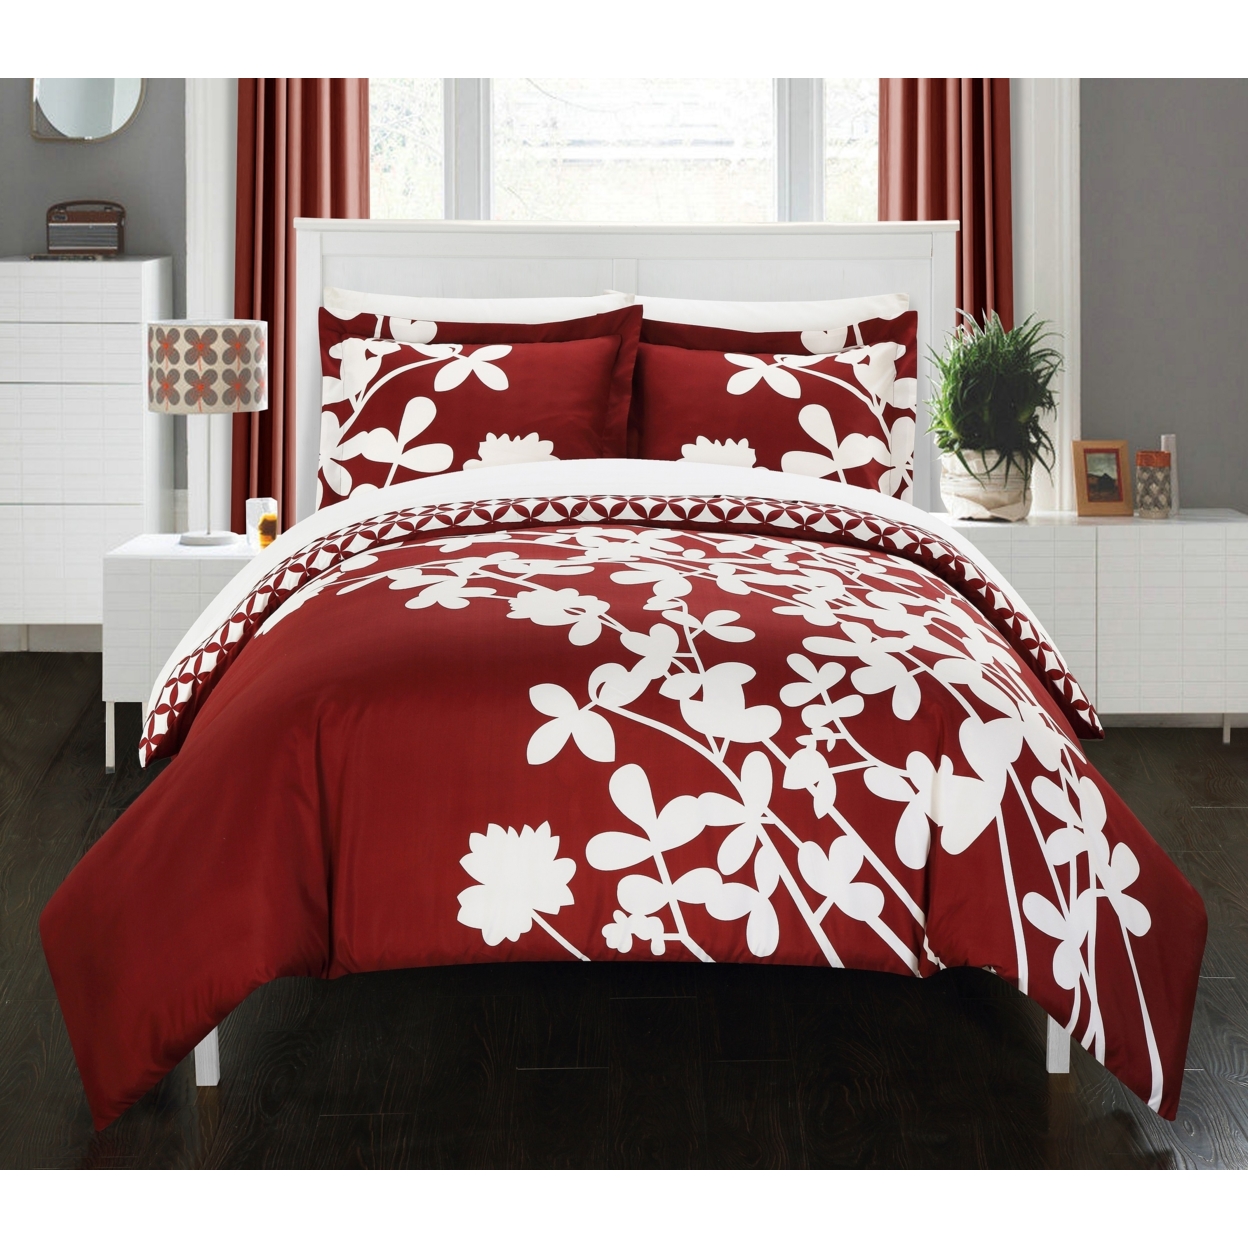 3 Piece Amaryllis Reversible Large Scale Floral Design Printed With Diamond Pattern Reverse Duvet Cover Set - Red, King